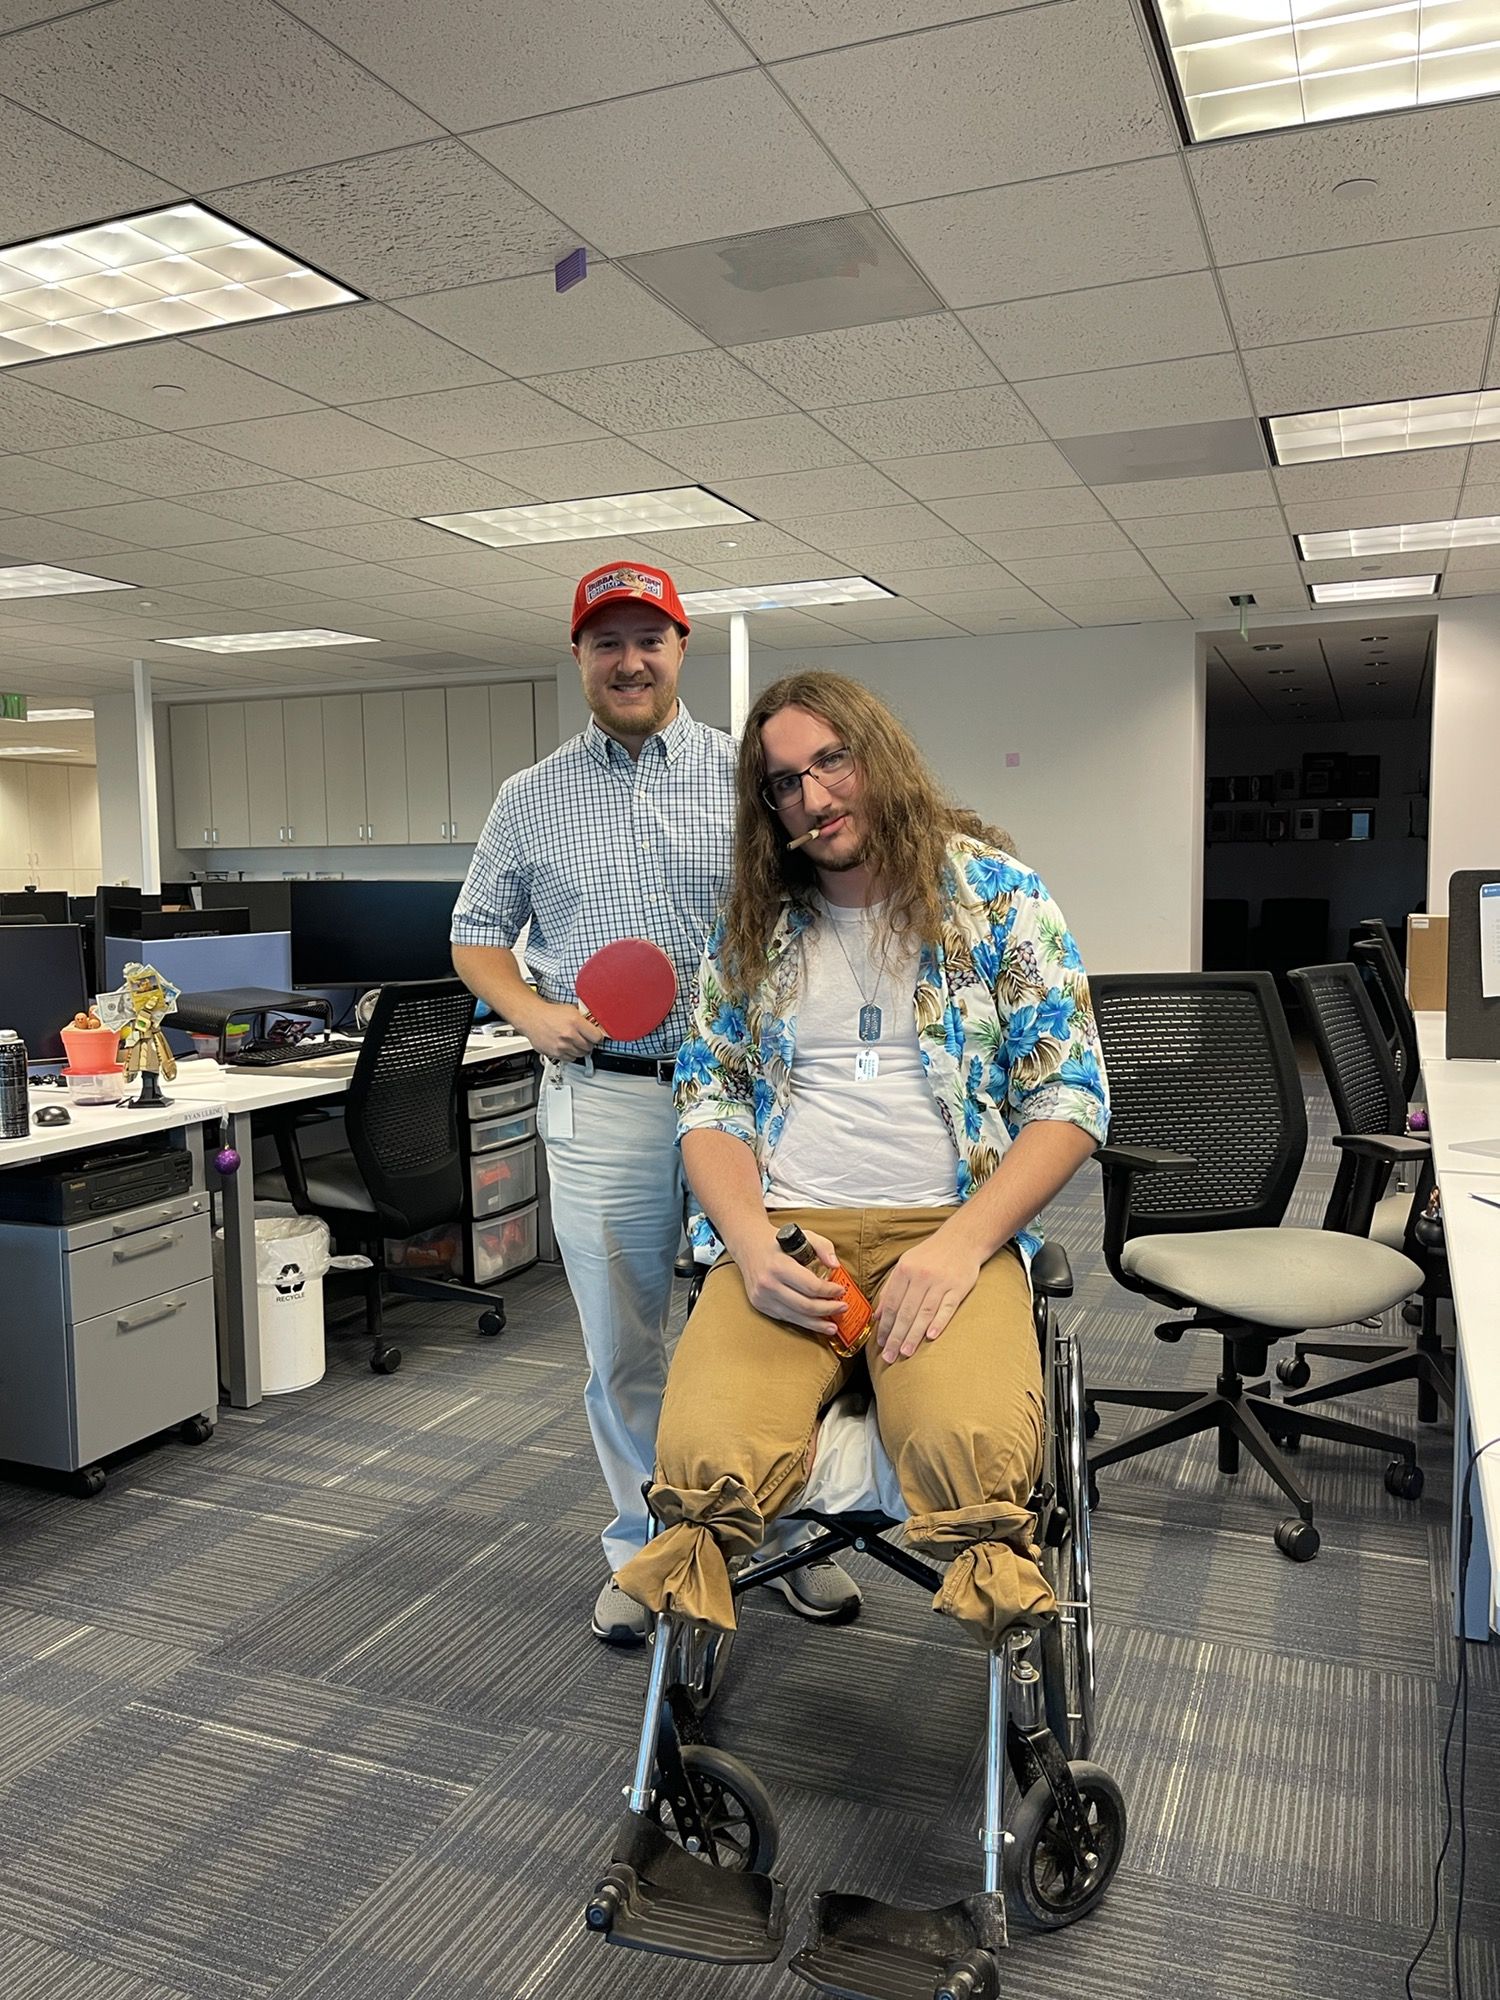 Update: We won the office costume contest